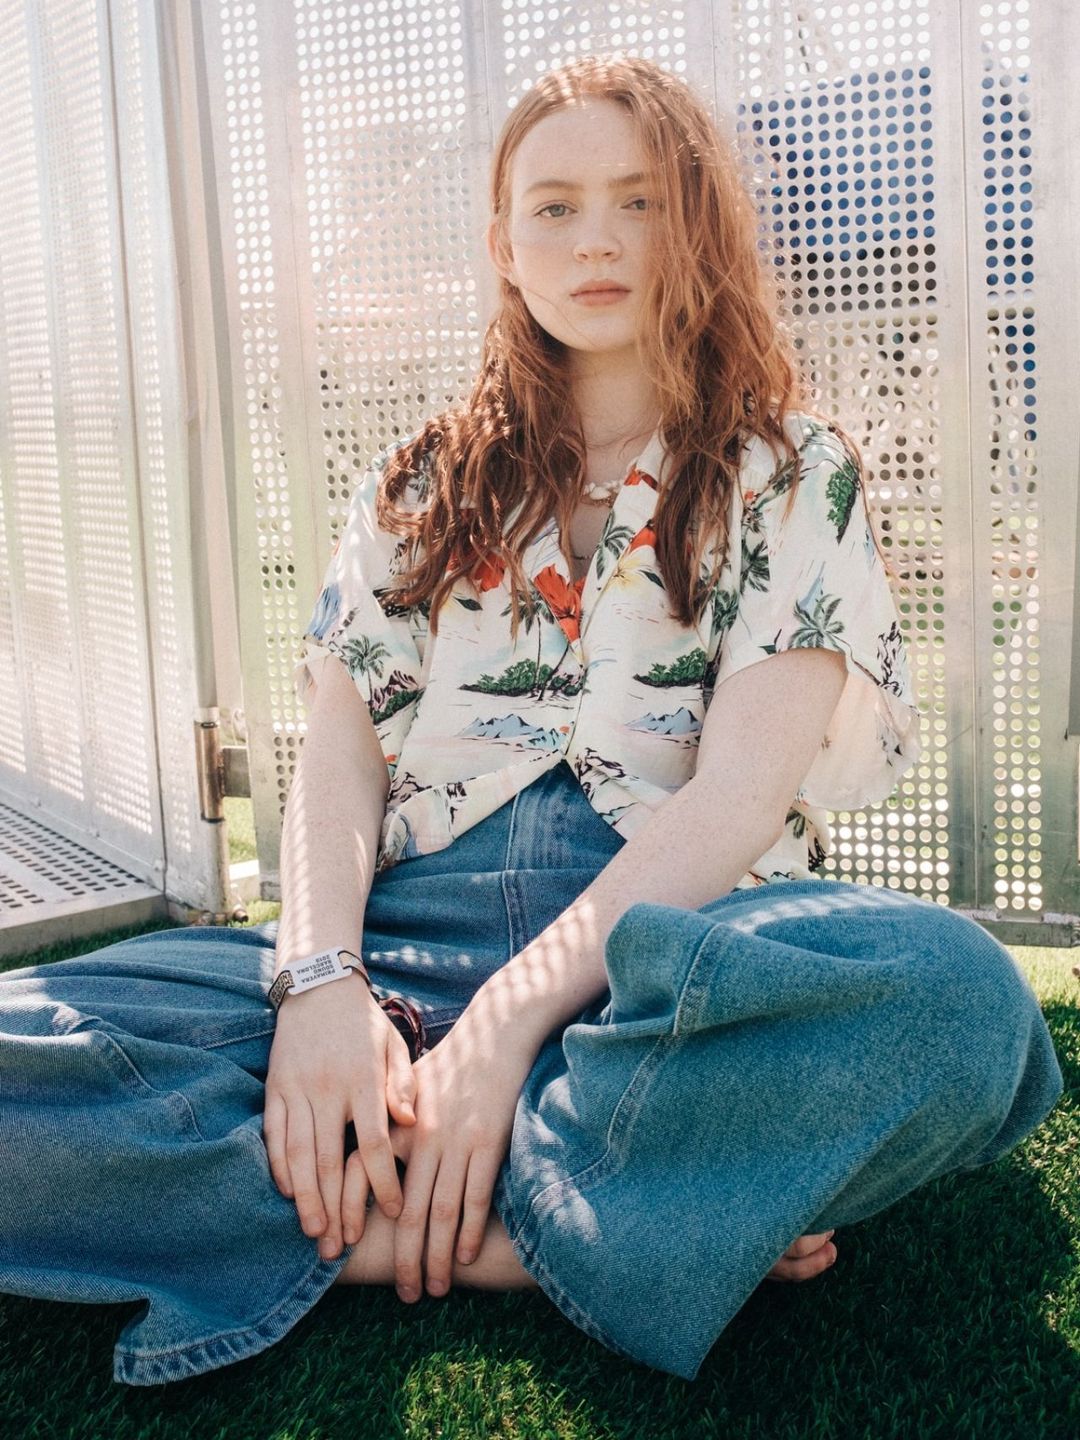 Sadie Sink who is her mother